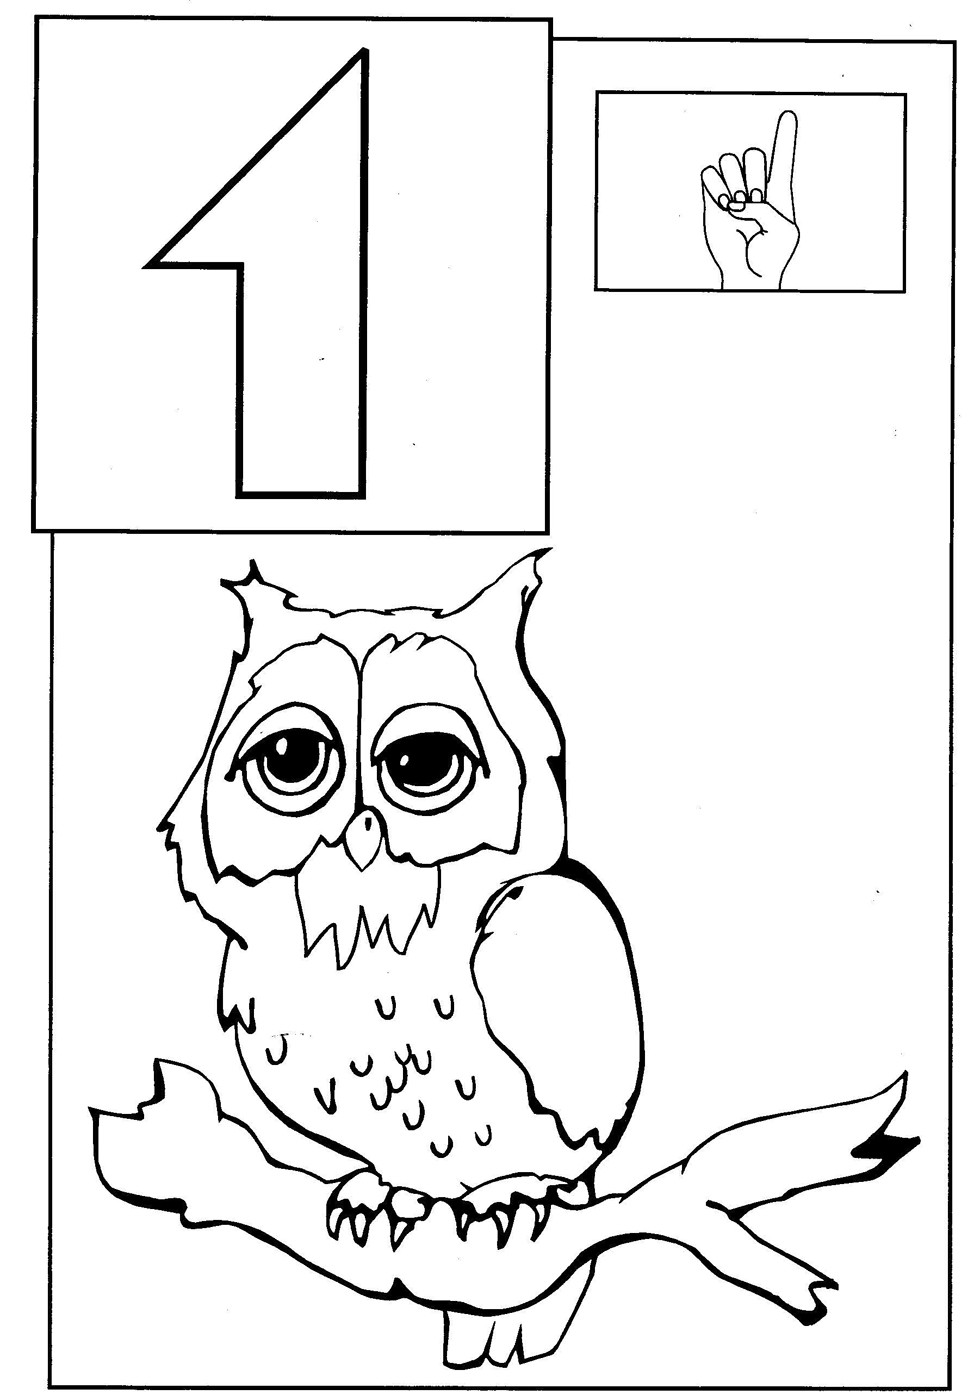 Coloring Book Toddler
 Toddler Coloring Pages